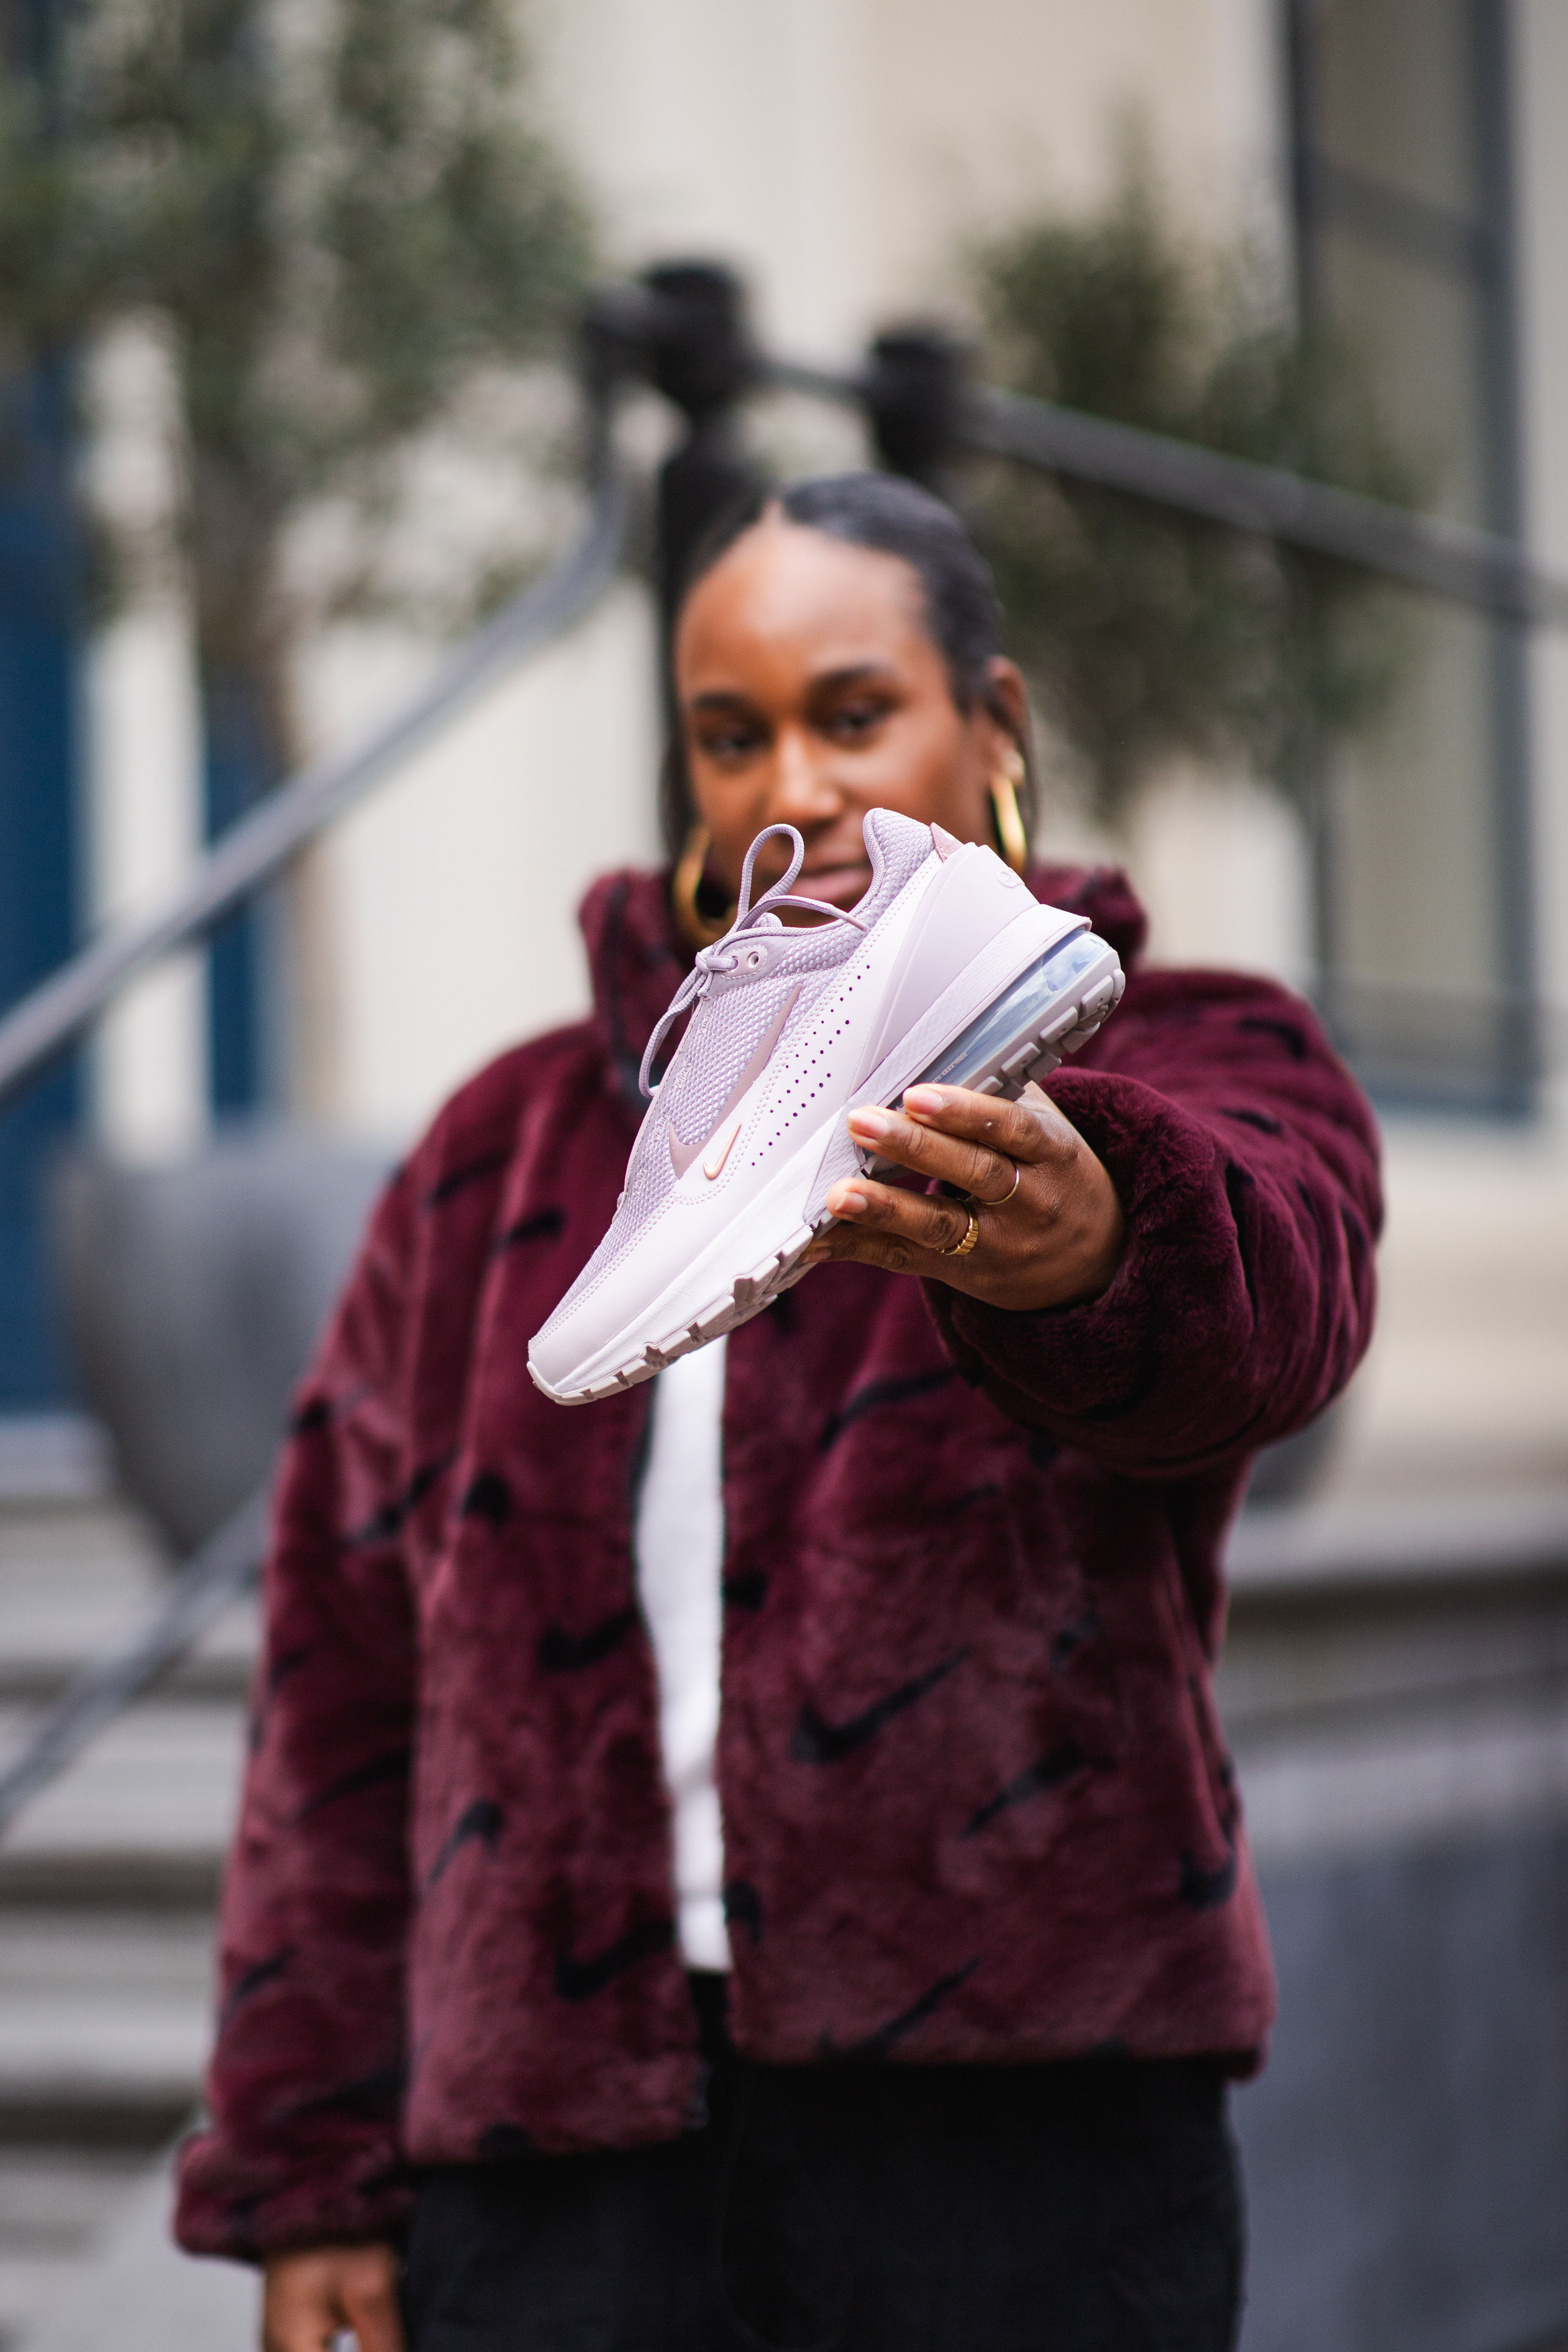 Nike Air Max Pulse WMNS 'Light Violet Ore' in hand